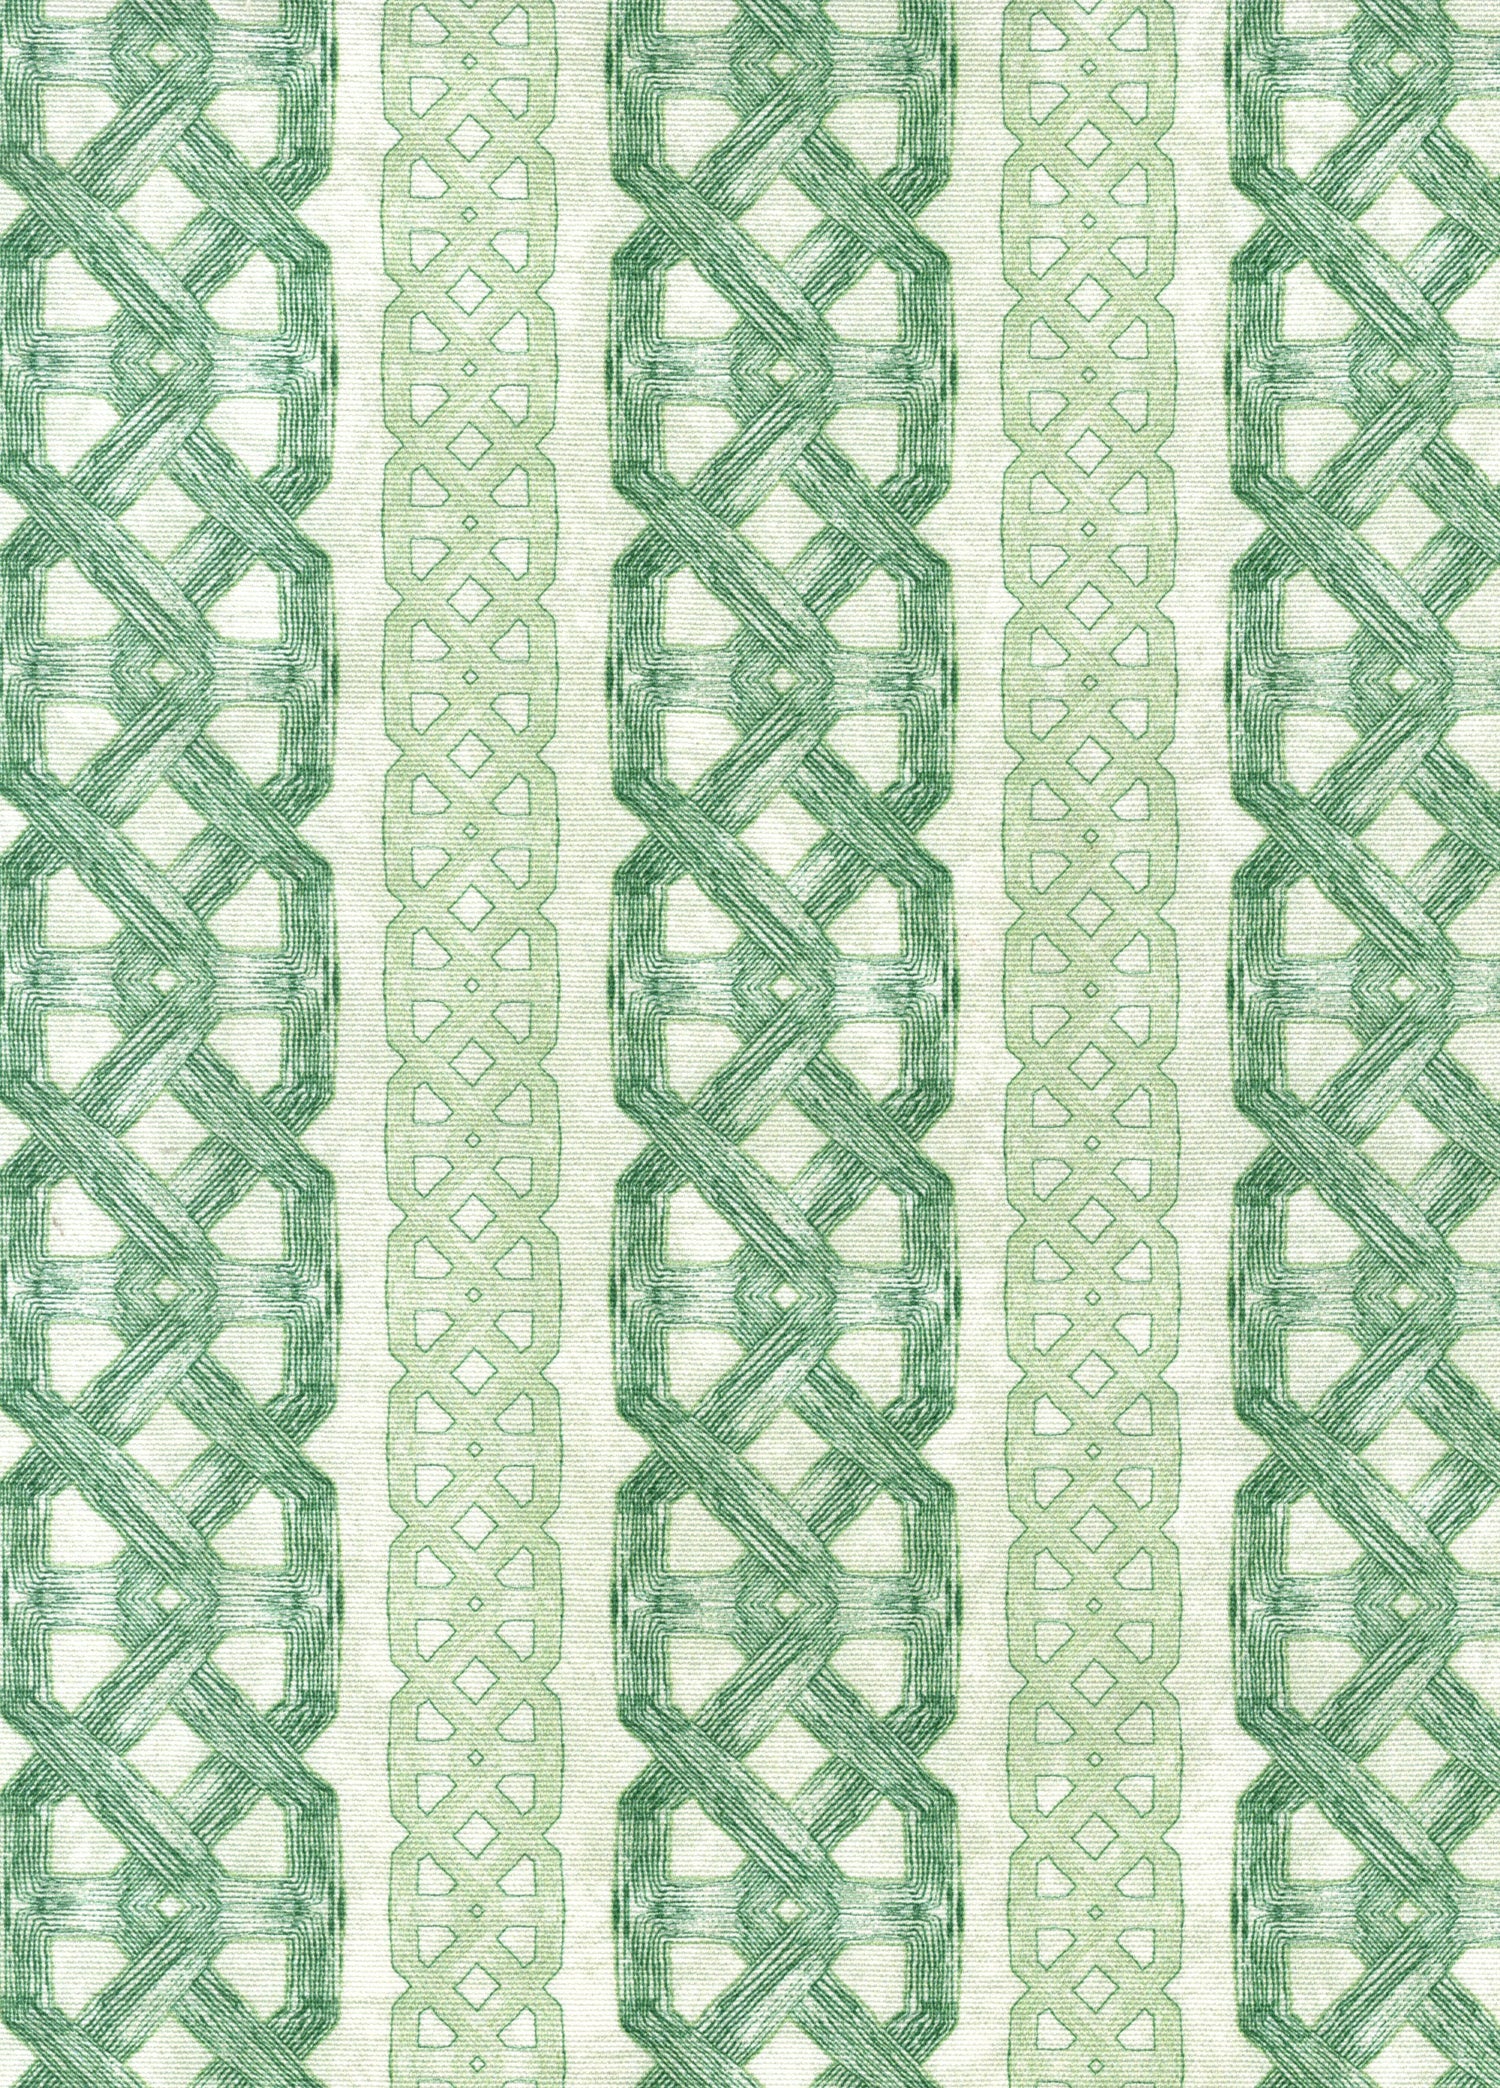 Detail of fabric in a geometric stripe print in shades of green on a mottled field.